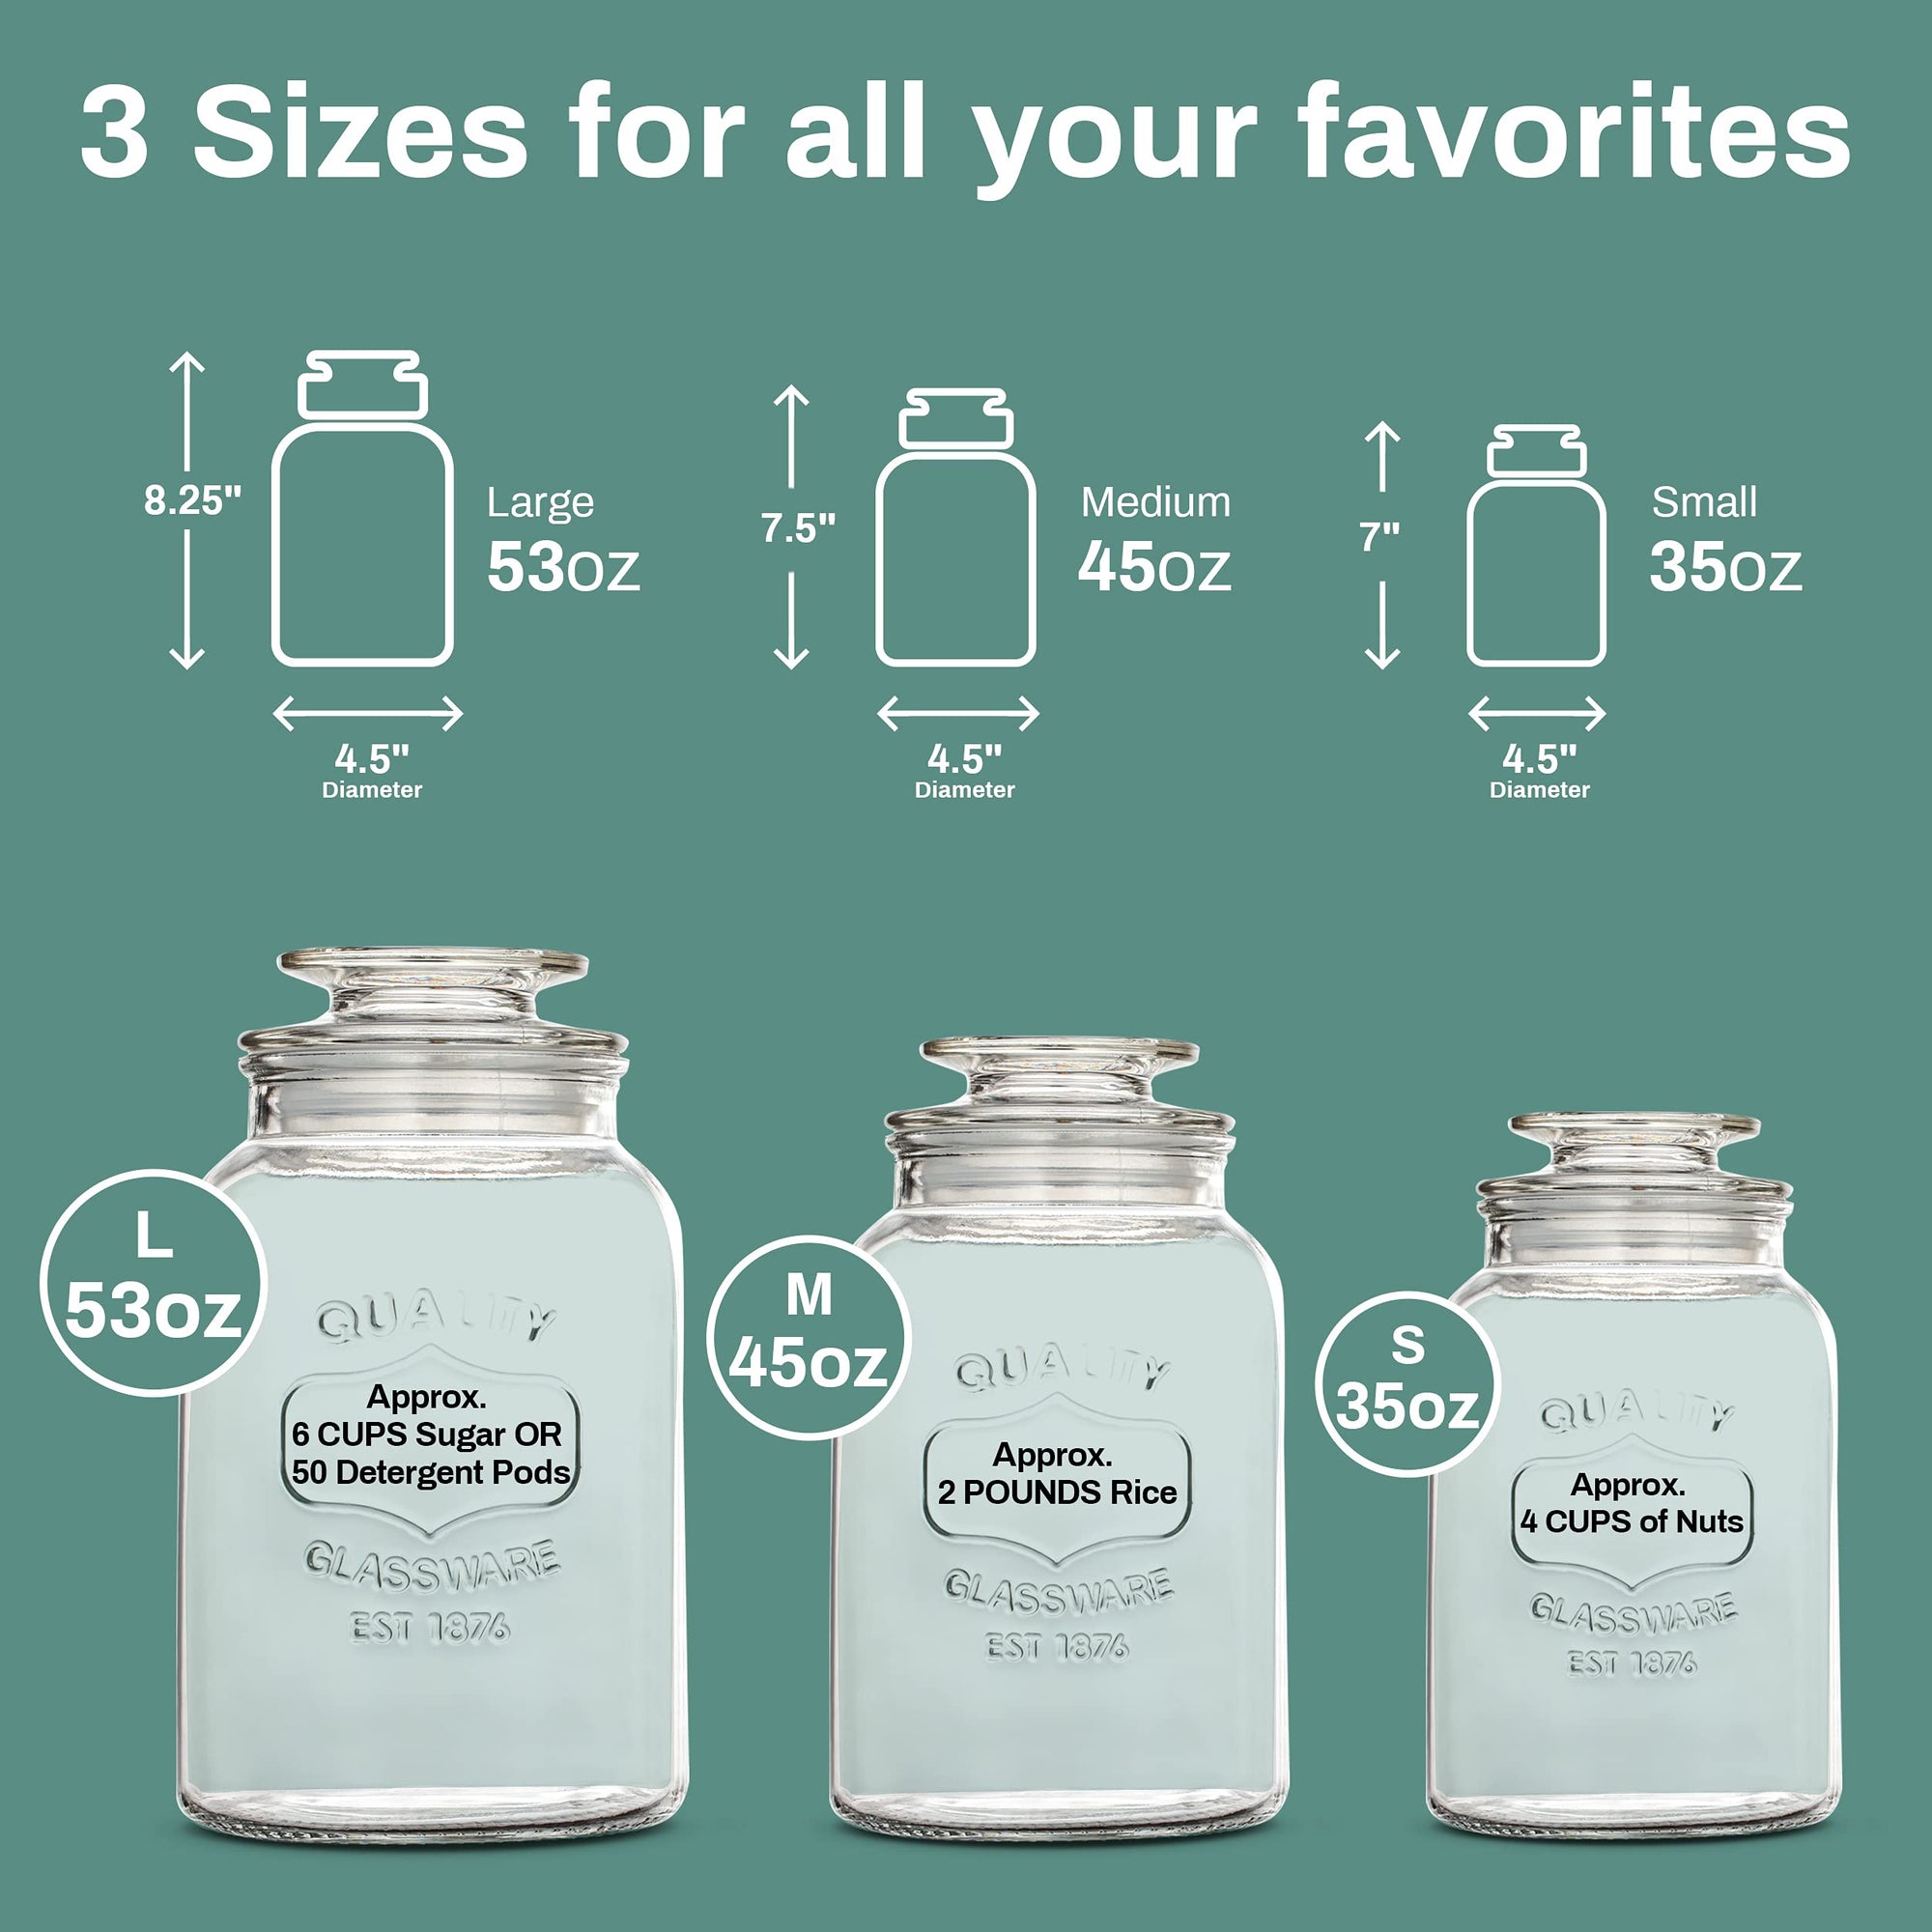 Home Intuition Heavy Glass Canister Set with Airtight Lid 3-Piece Set, Kitchen & Bathroom Apothecary Glass Jars For Candies, Cereal, Nuts & Bathroom Supplies, Storage Airtight Containers